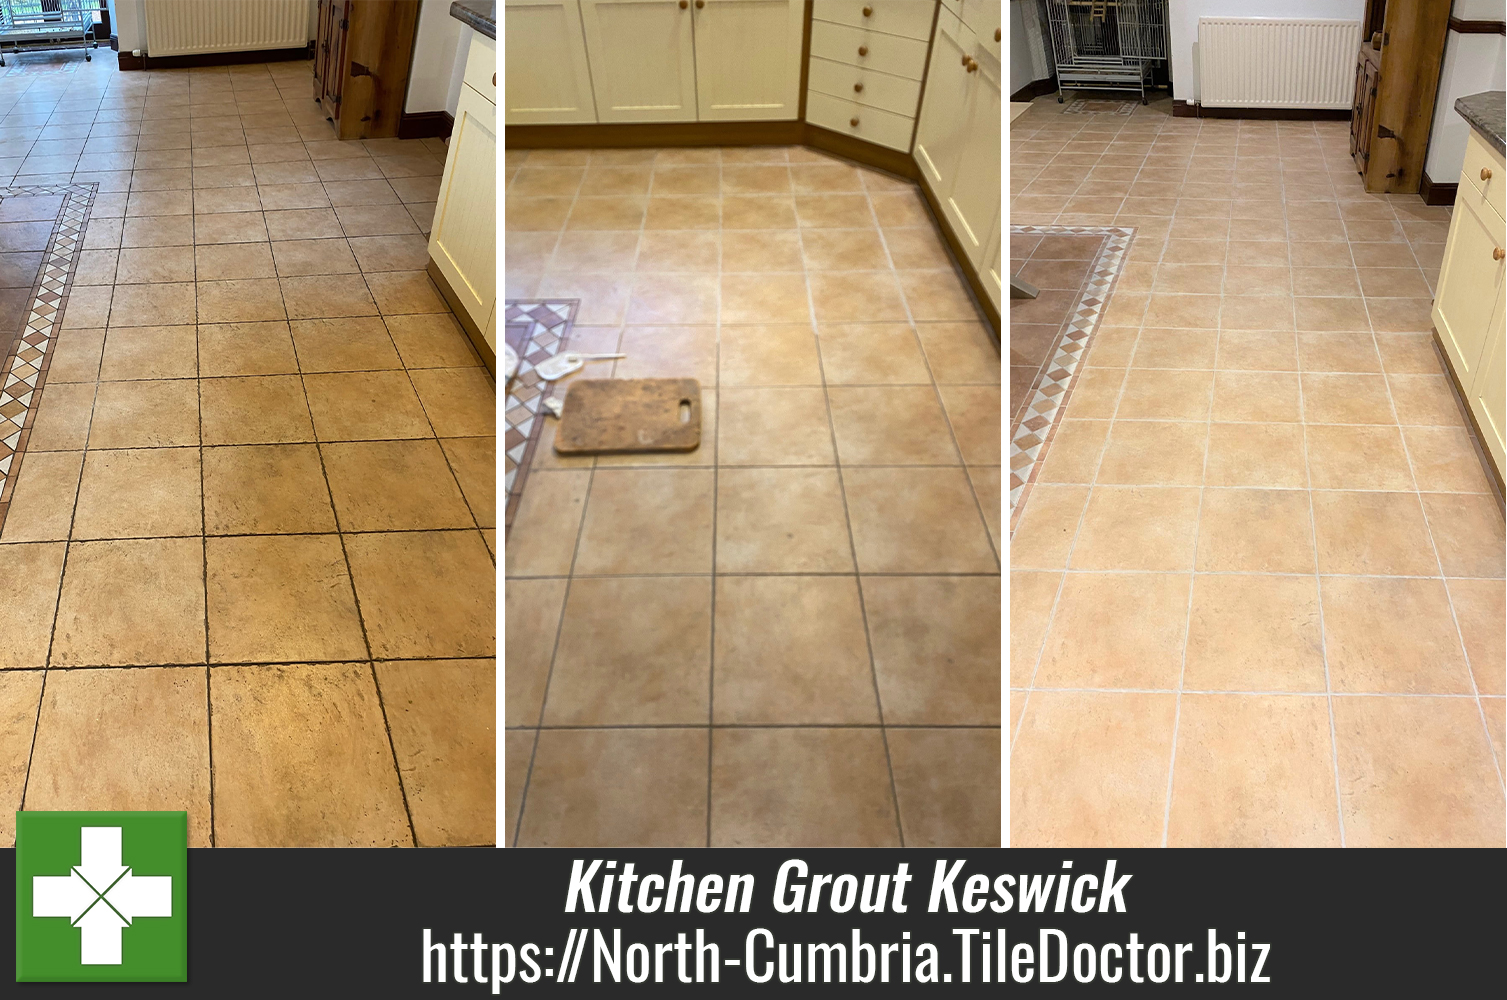 Textured Ceramic Tile and Grout Clean and Colouring in a Keswick Kitchen